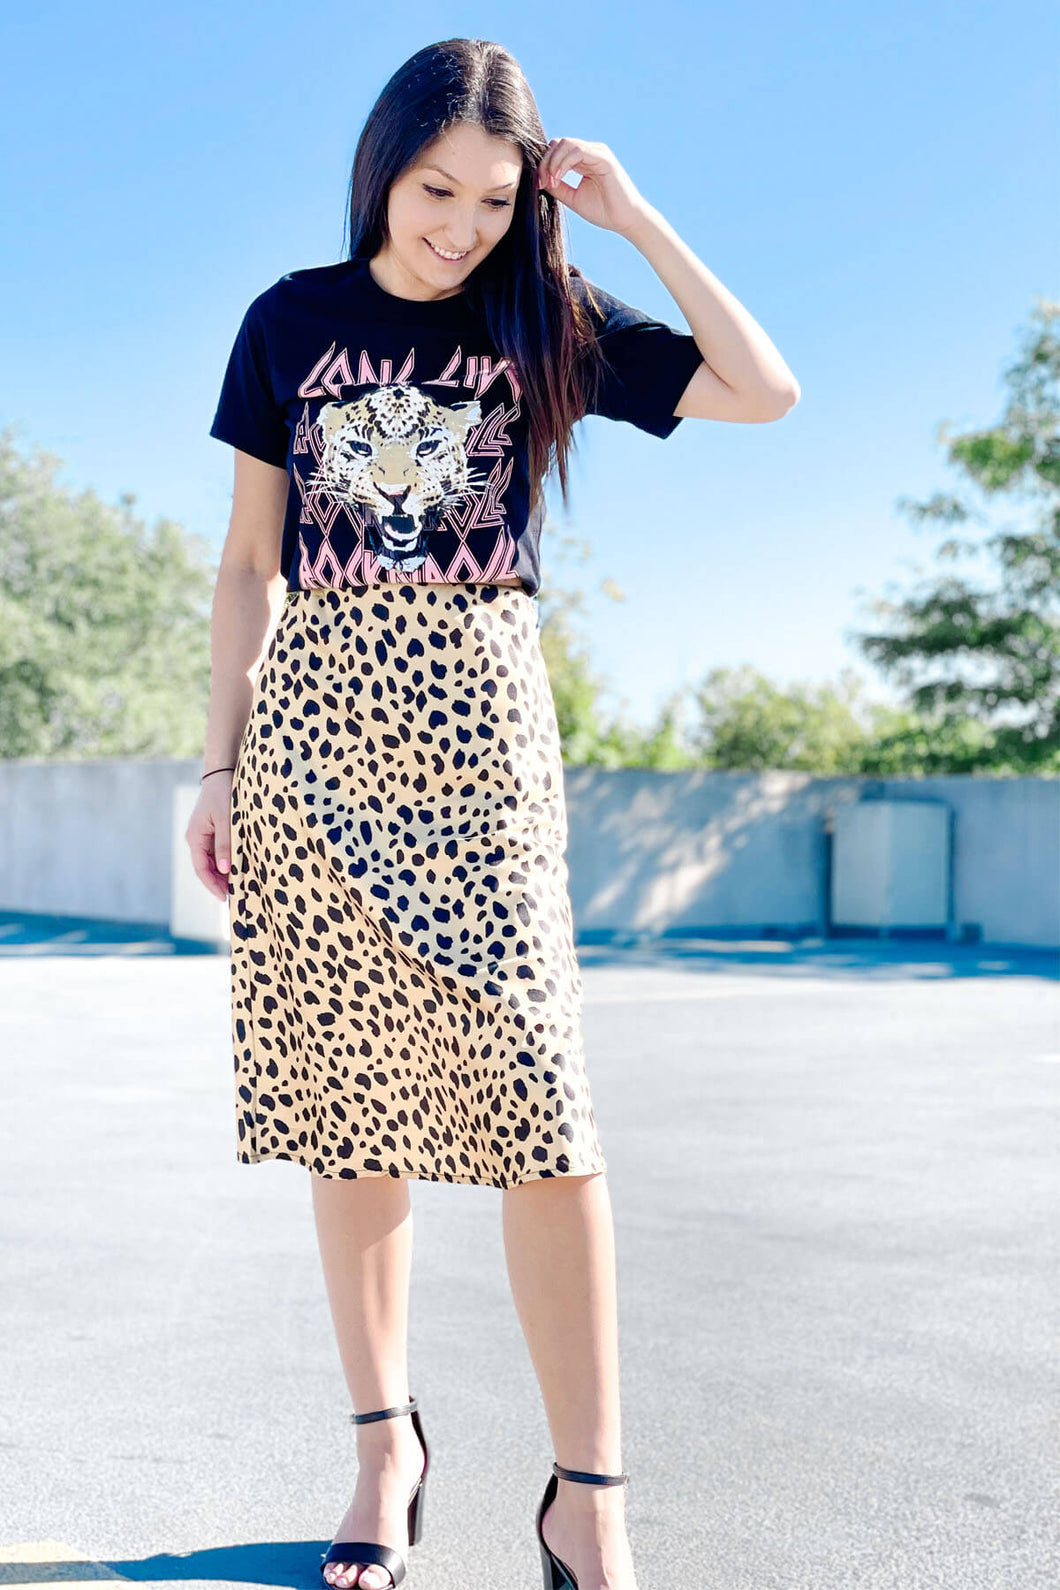 women's black long live rock and roll graphic tees paired with satin waist band gold leopard midi skirt and black strap heels